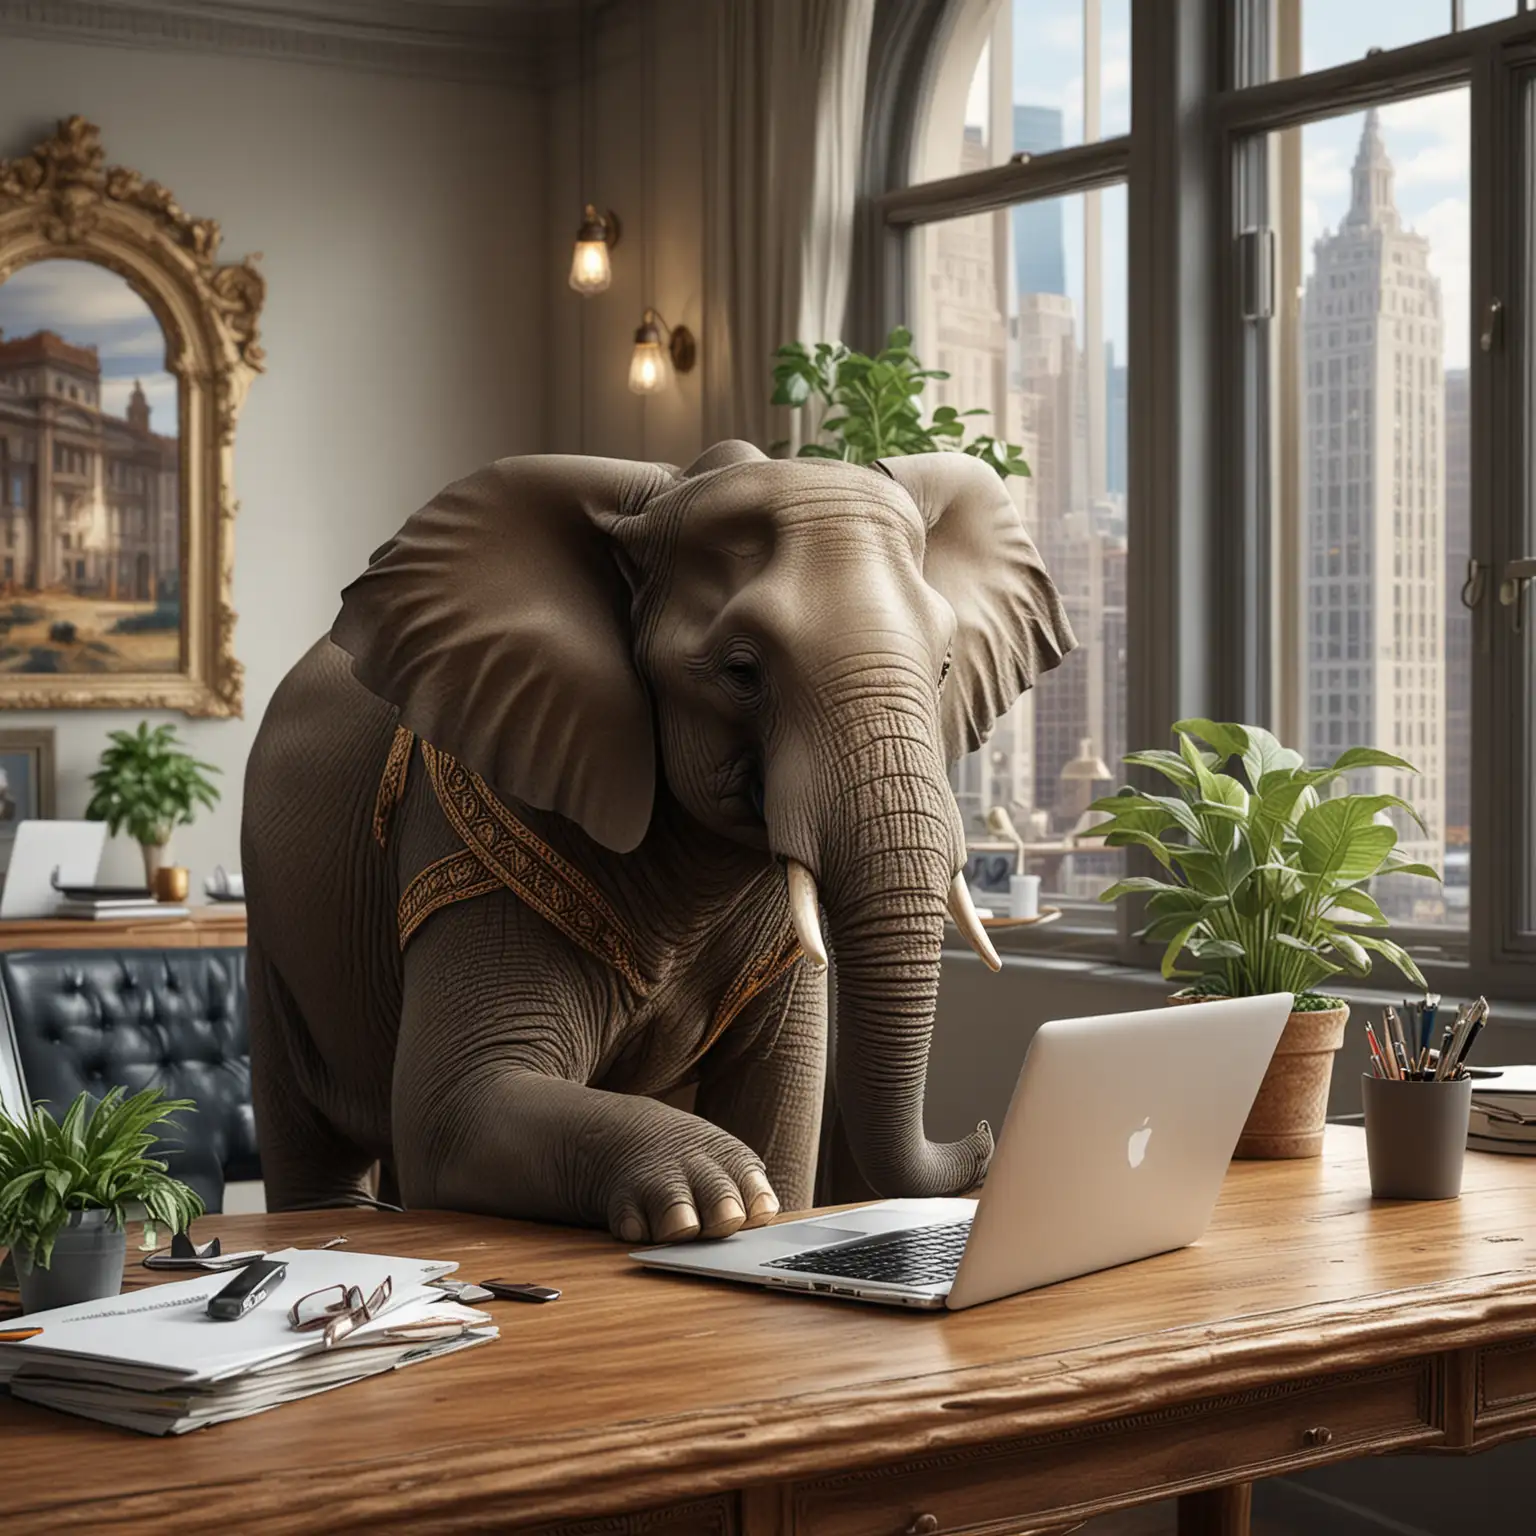 Elephant Using Laptop at Ornate Desk in City Office